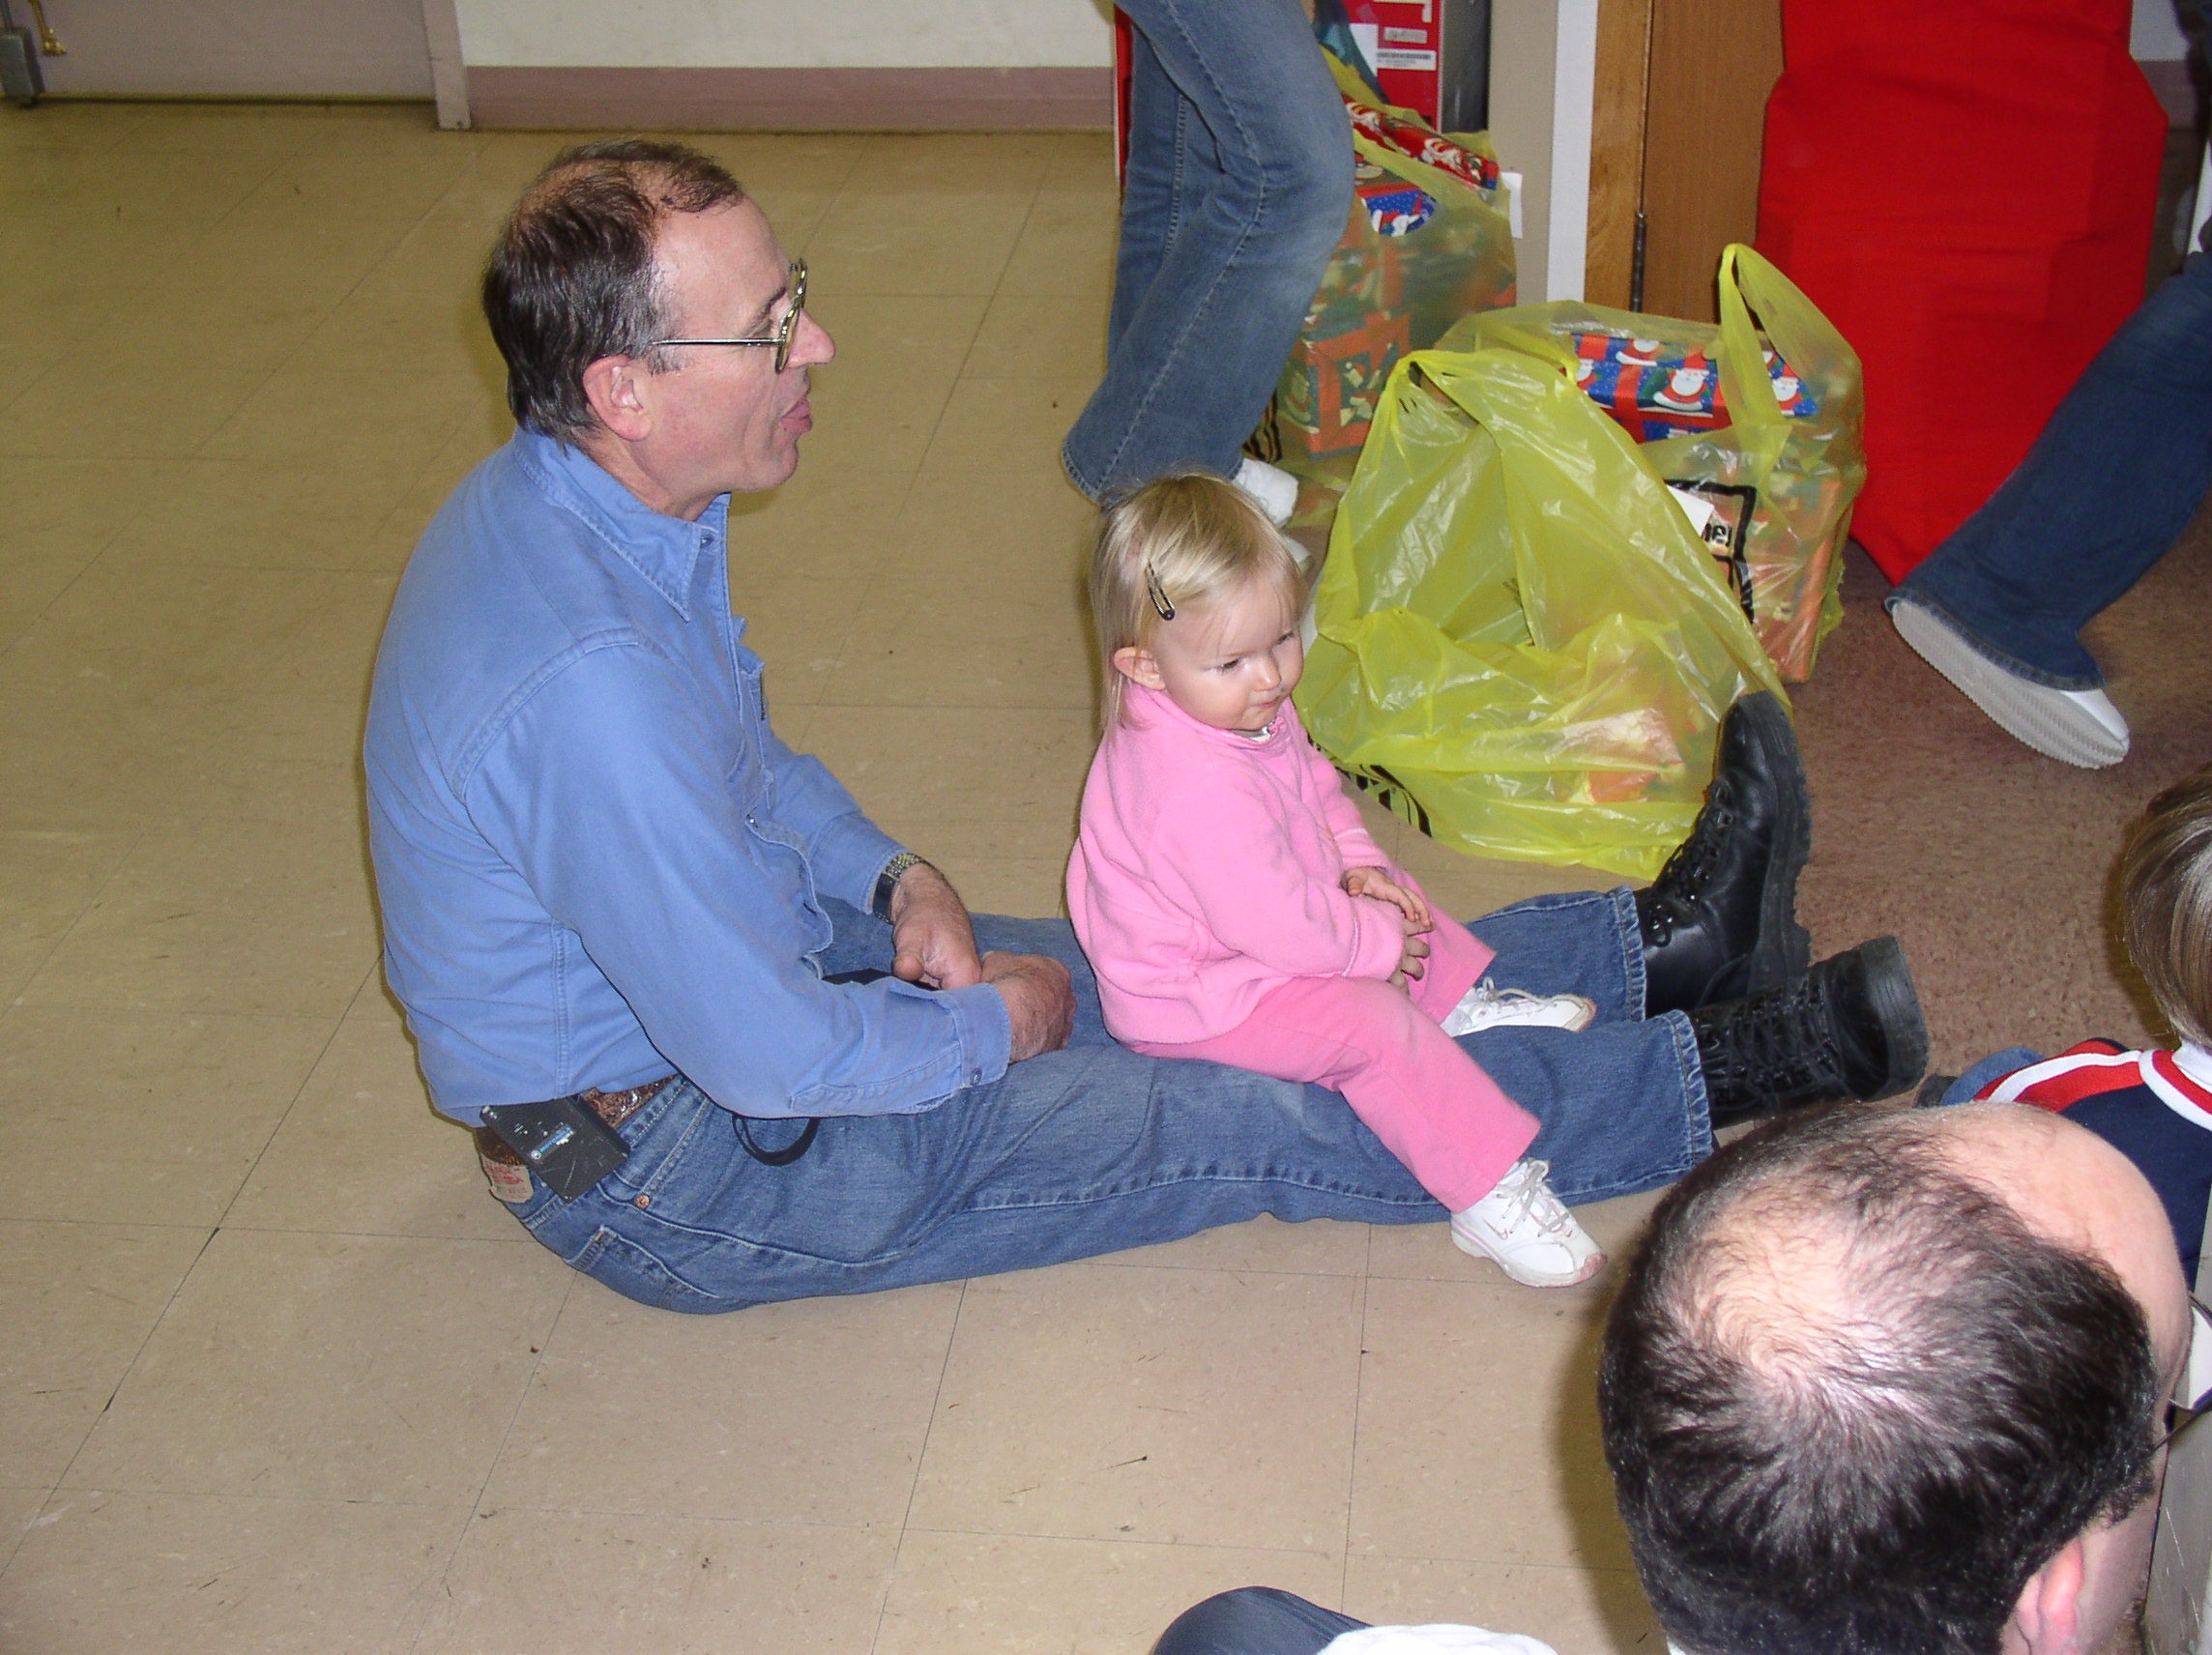 12-15-03  Other - Children's Christmas Party